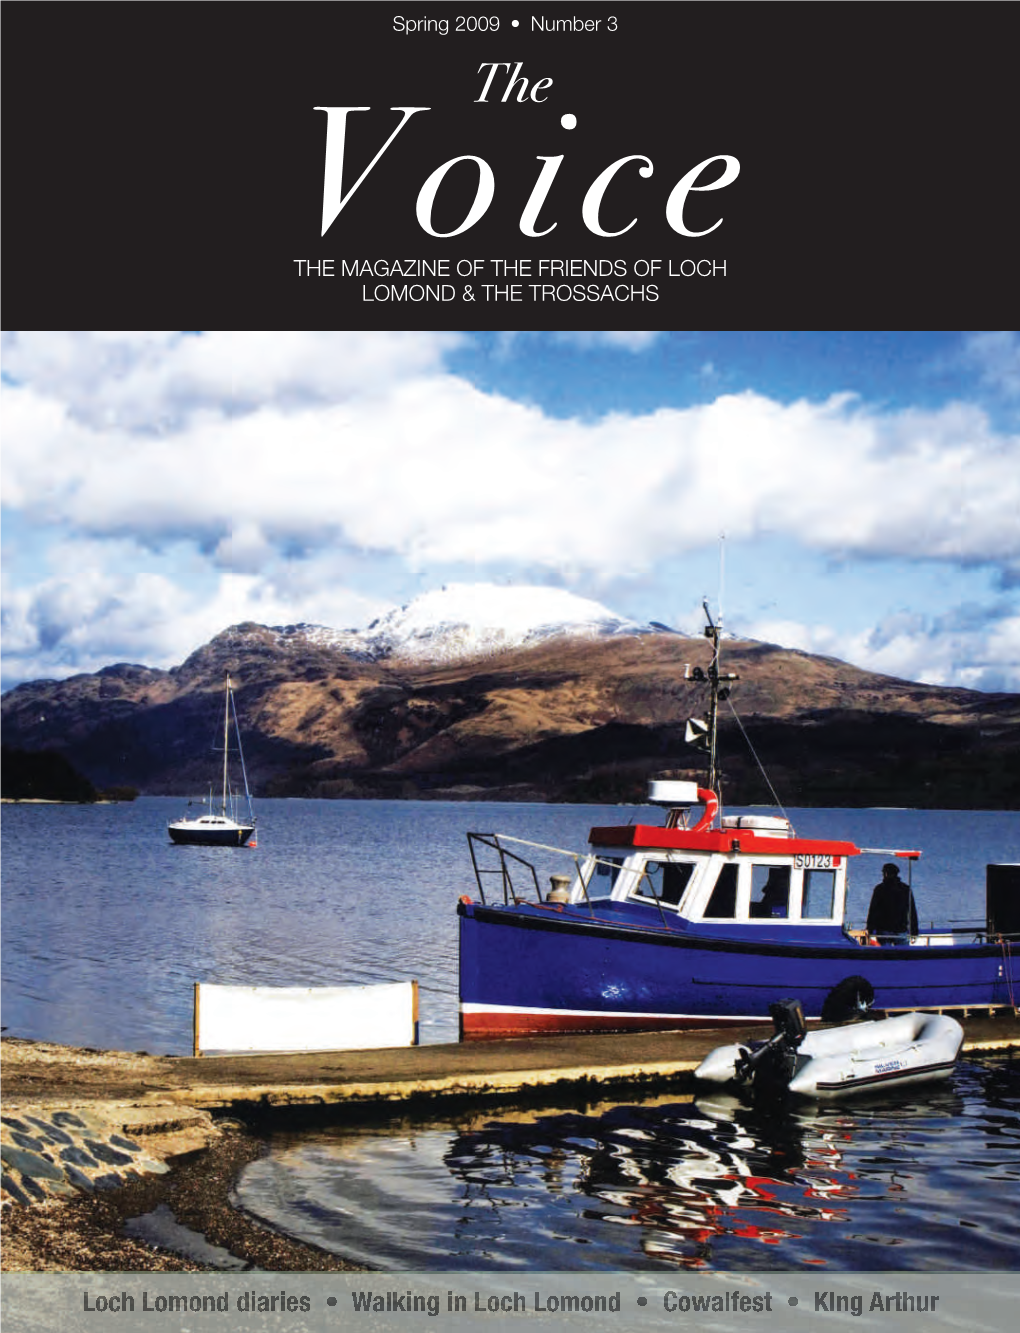 The Magazine of the Friends of Loch Lomond & The